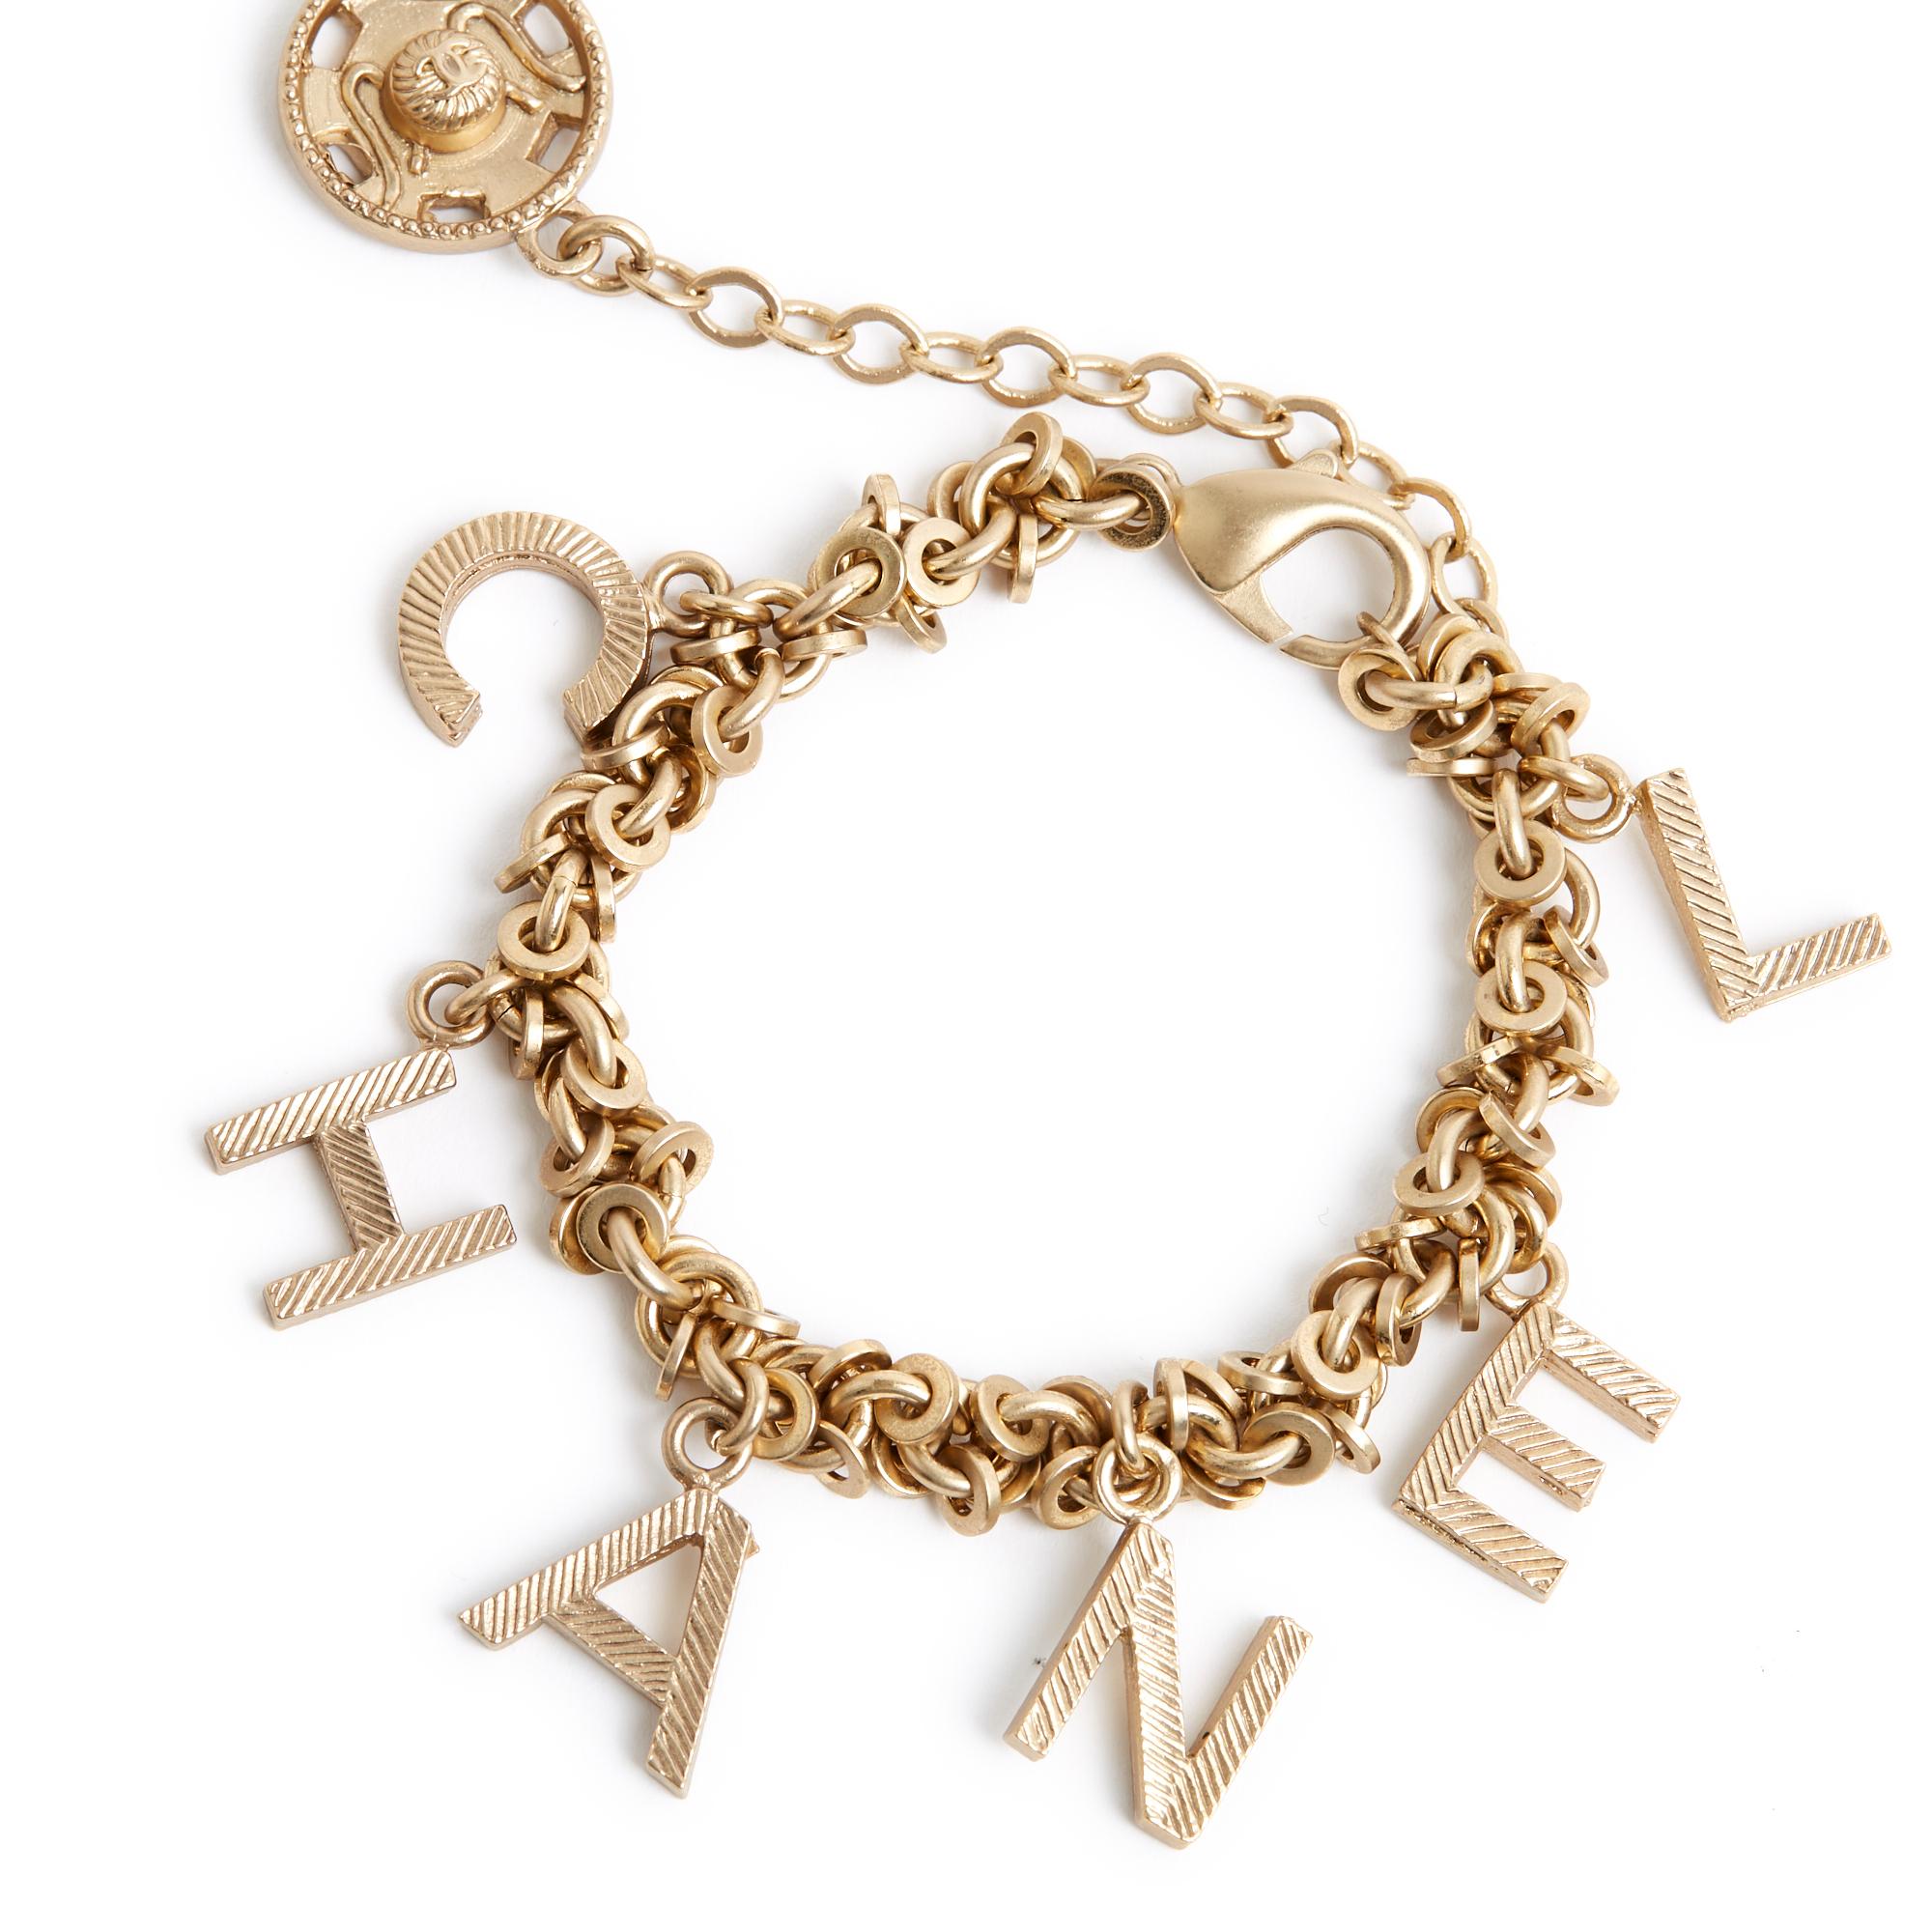 Chanel Collection FW2003 bracelet in matte gold metal, composed of a chain with round links and tassels with Chanel letters, fastening with a carabiner on a chain ending with a sewing snap decorated with the CC logo. Length of the bracelet 17 cm